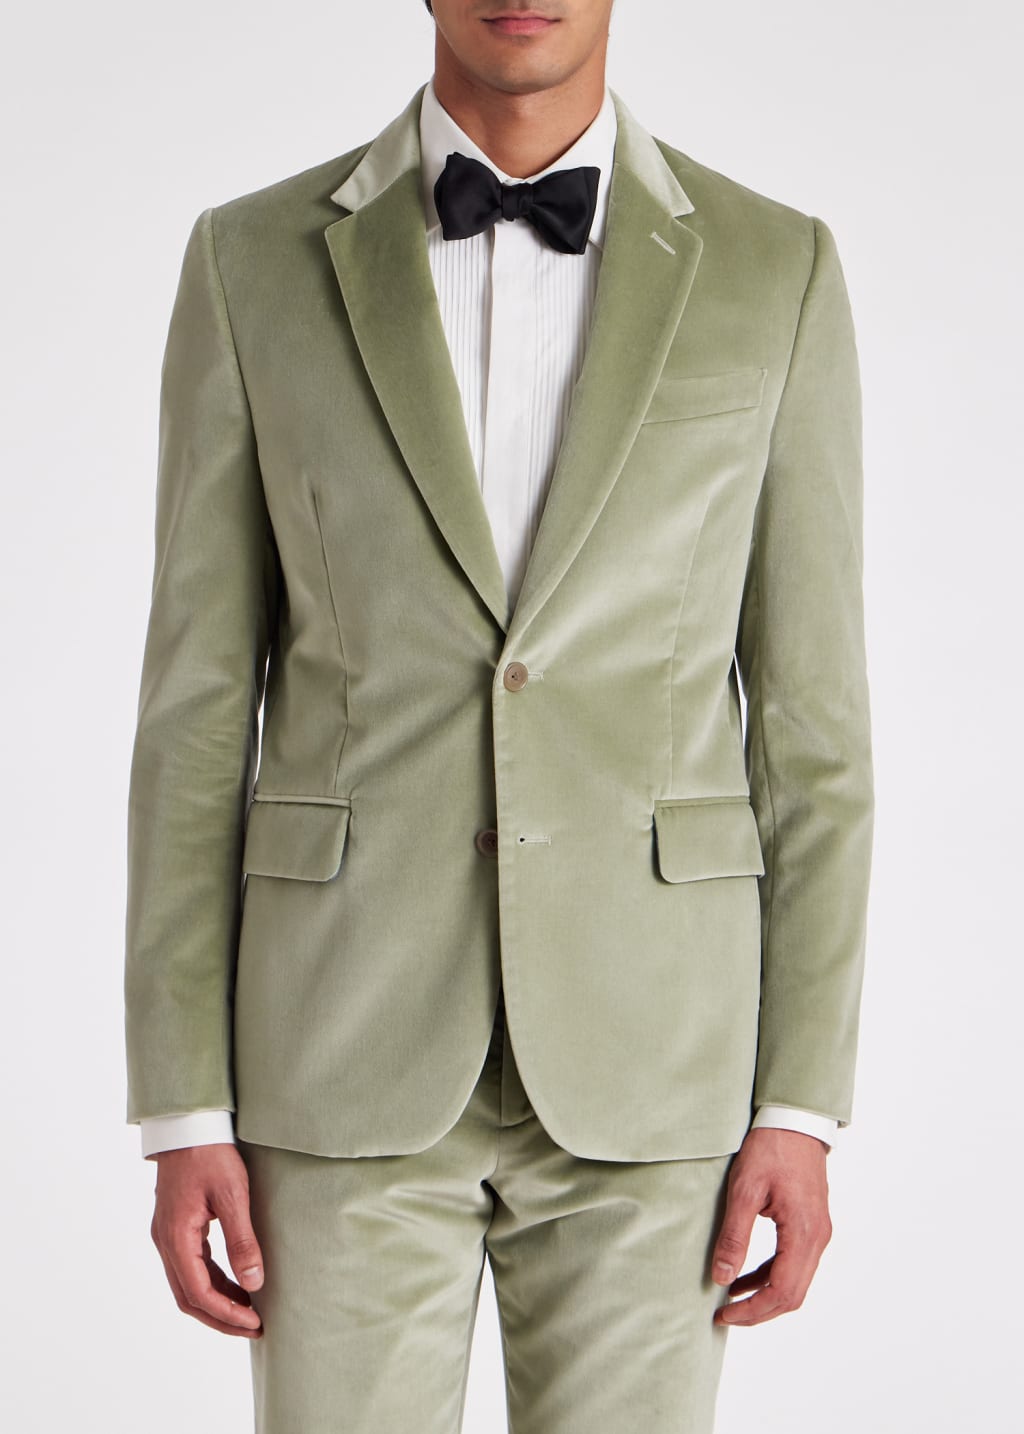 Model View - The Soho - Tailored-Fit Pistachio Velvet Suit by Paul Smith